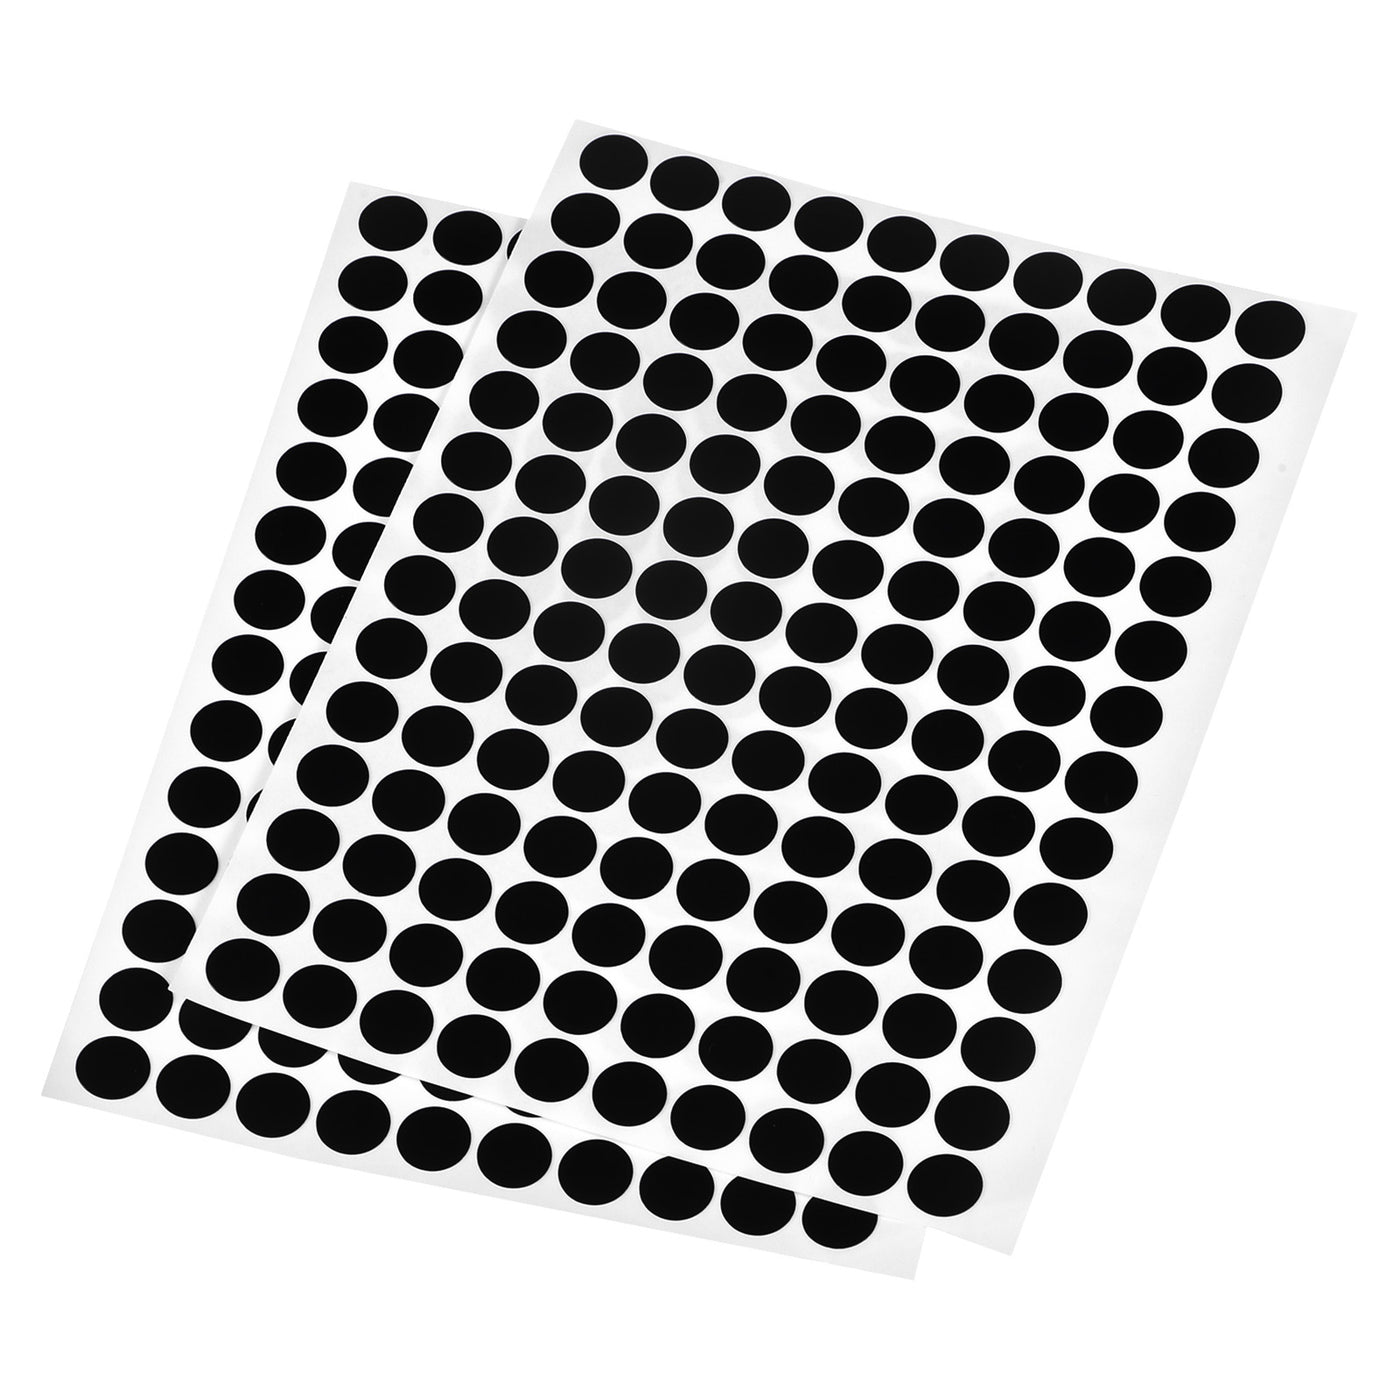 uxcell Uxcell Screw Hole Cover Stickers, 12mm Dia PVC Self Adhesive Covers Caps for Wood Furniture Cabinet Shelf Wardrobe, Black 4 Sheet/560pcs